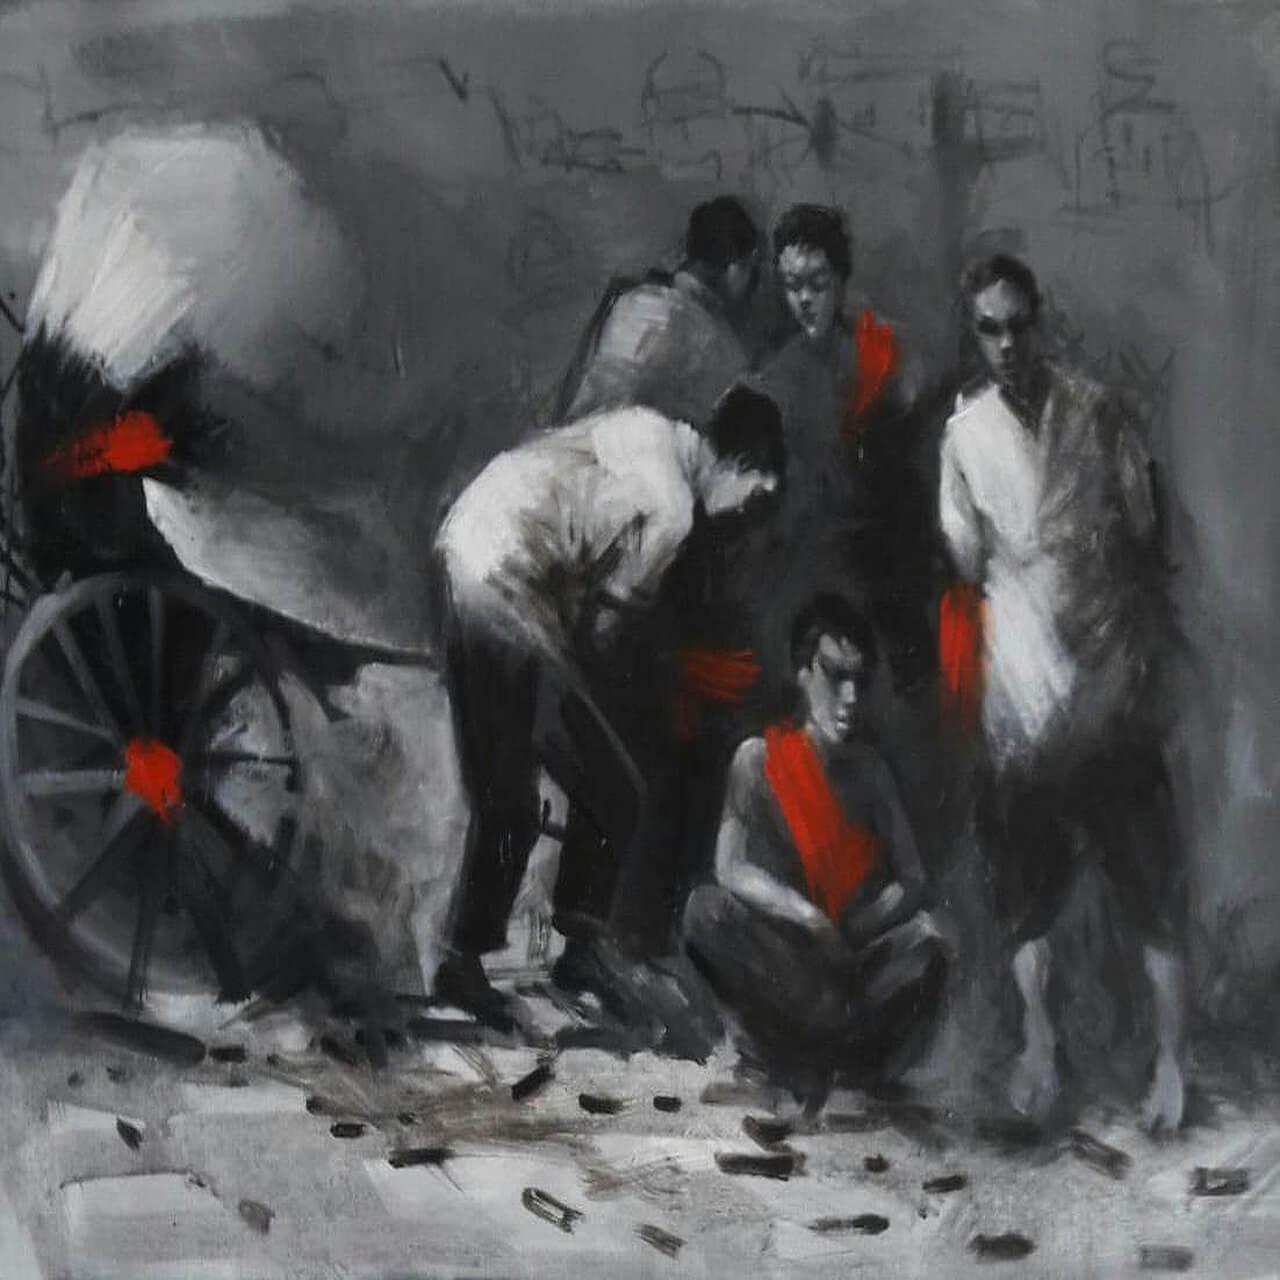 Dilip Chaudhury Figurative Painting - Benaras, Acrylic on Canvas by Contemporary Indian Artist "In Stock"